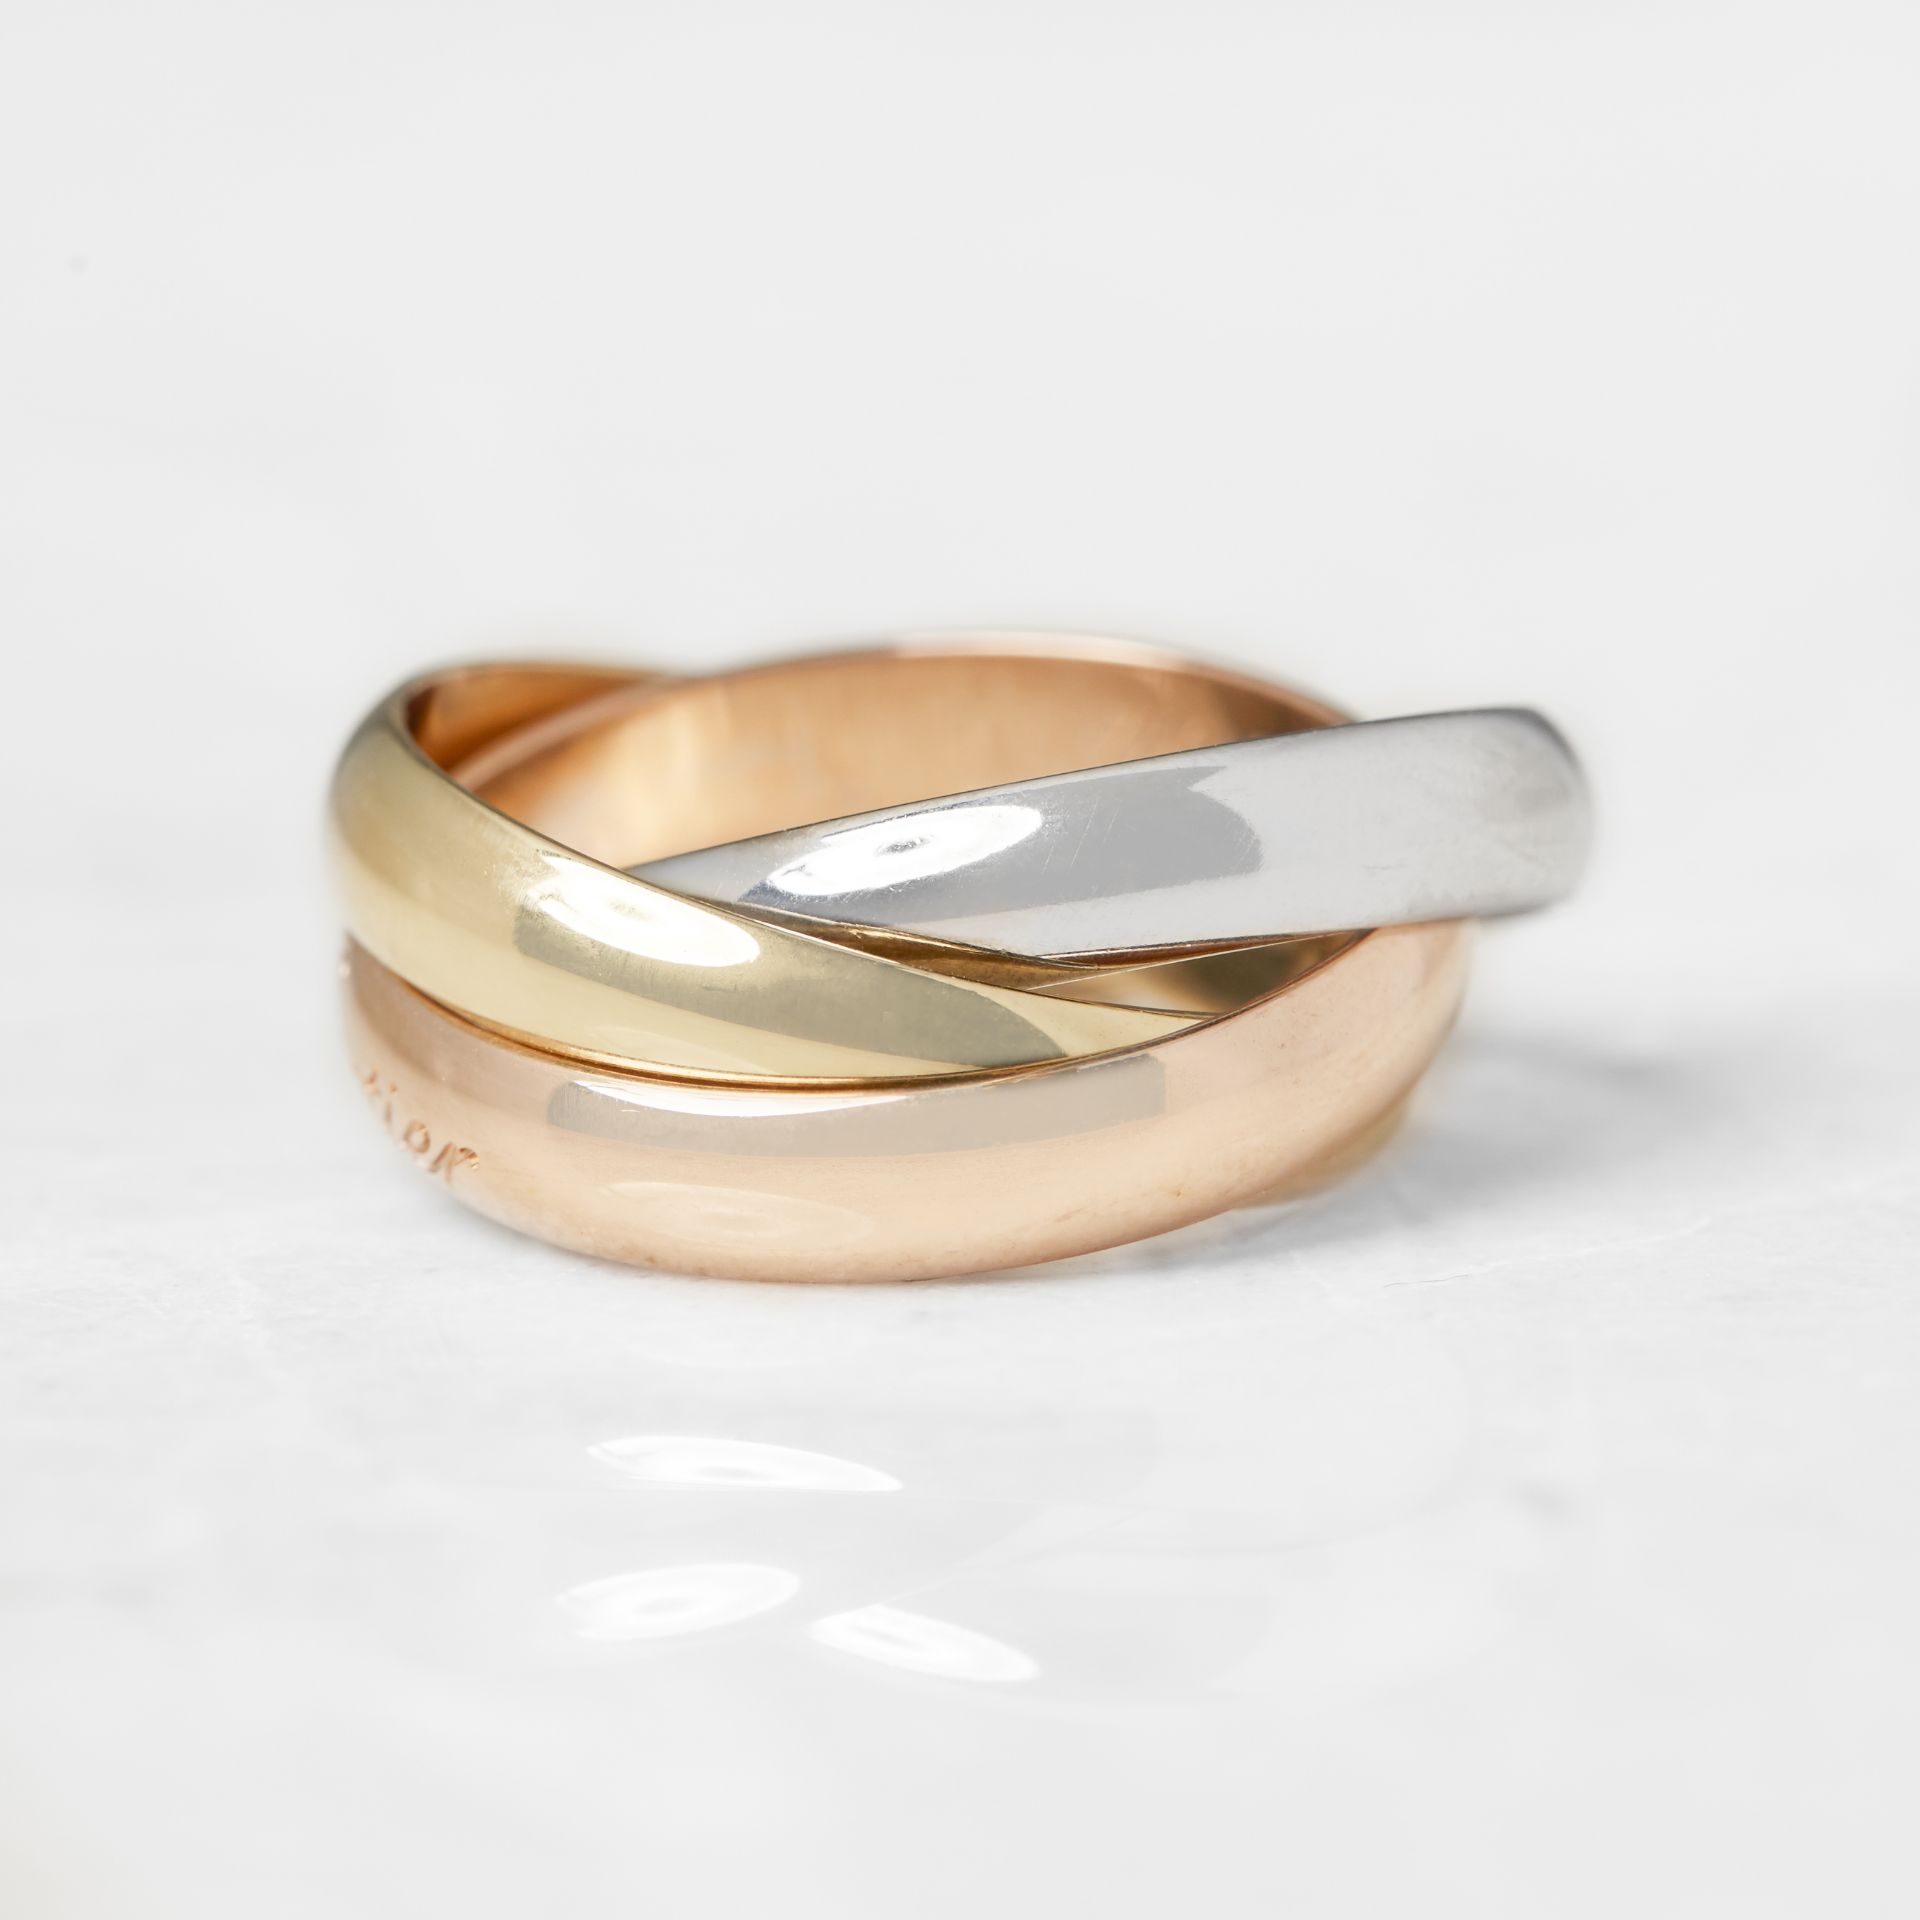 Cartier 18k Yellow, White & Rose Gold Trinity Ring - Image 8 of 17